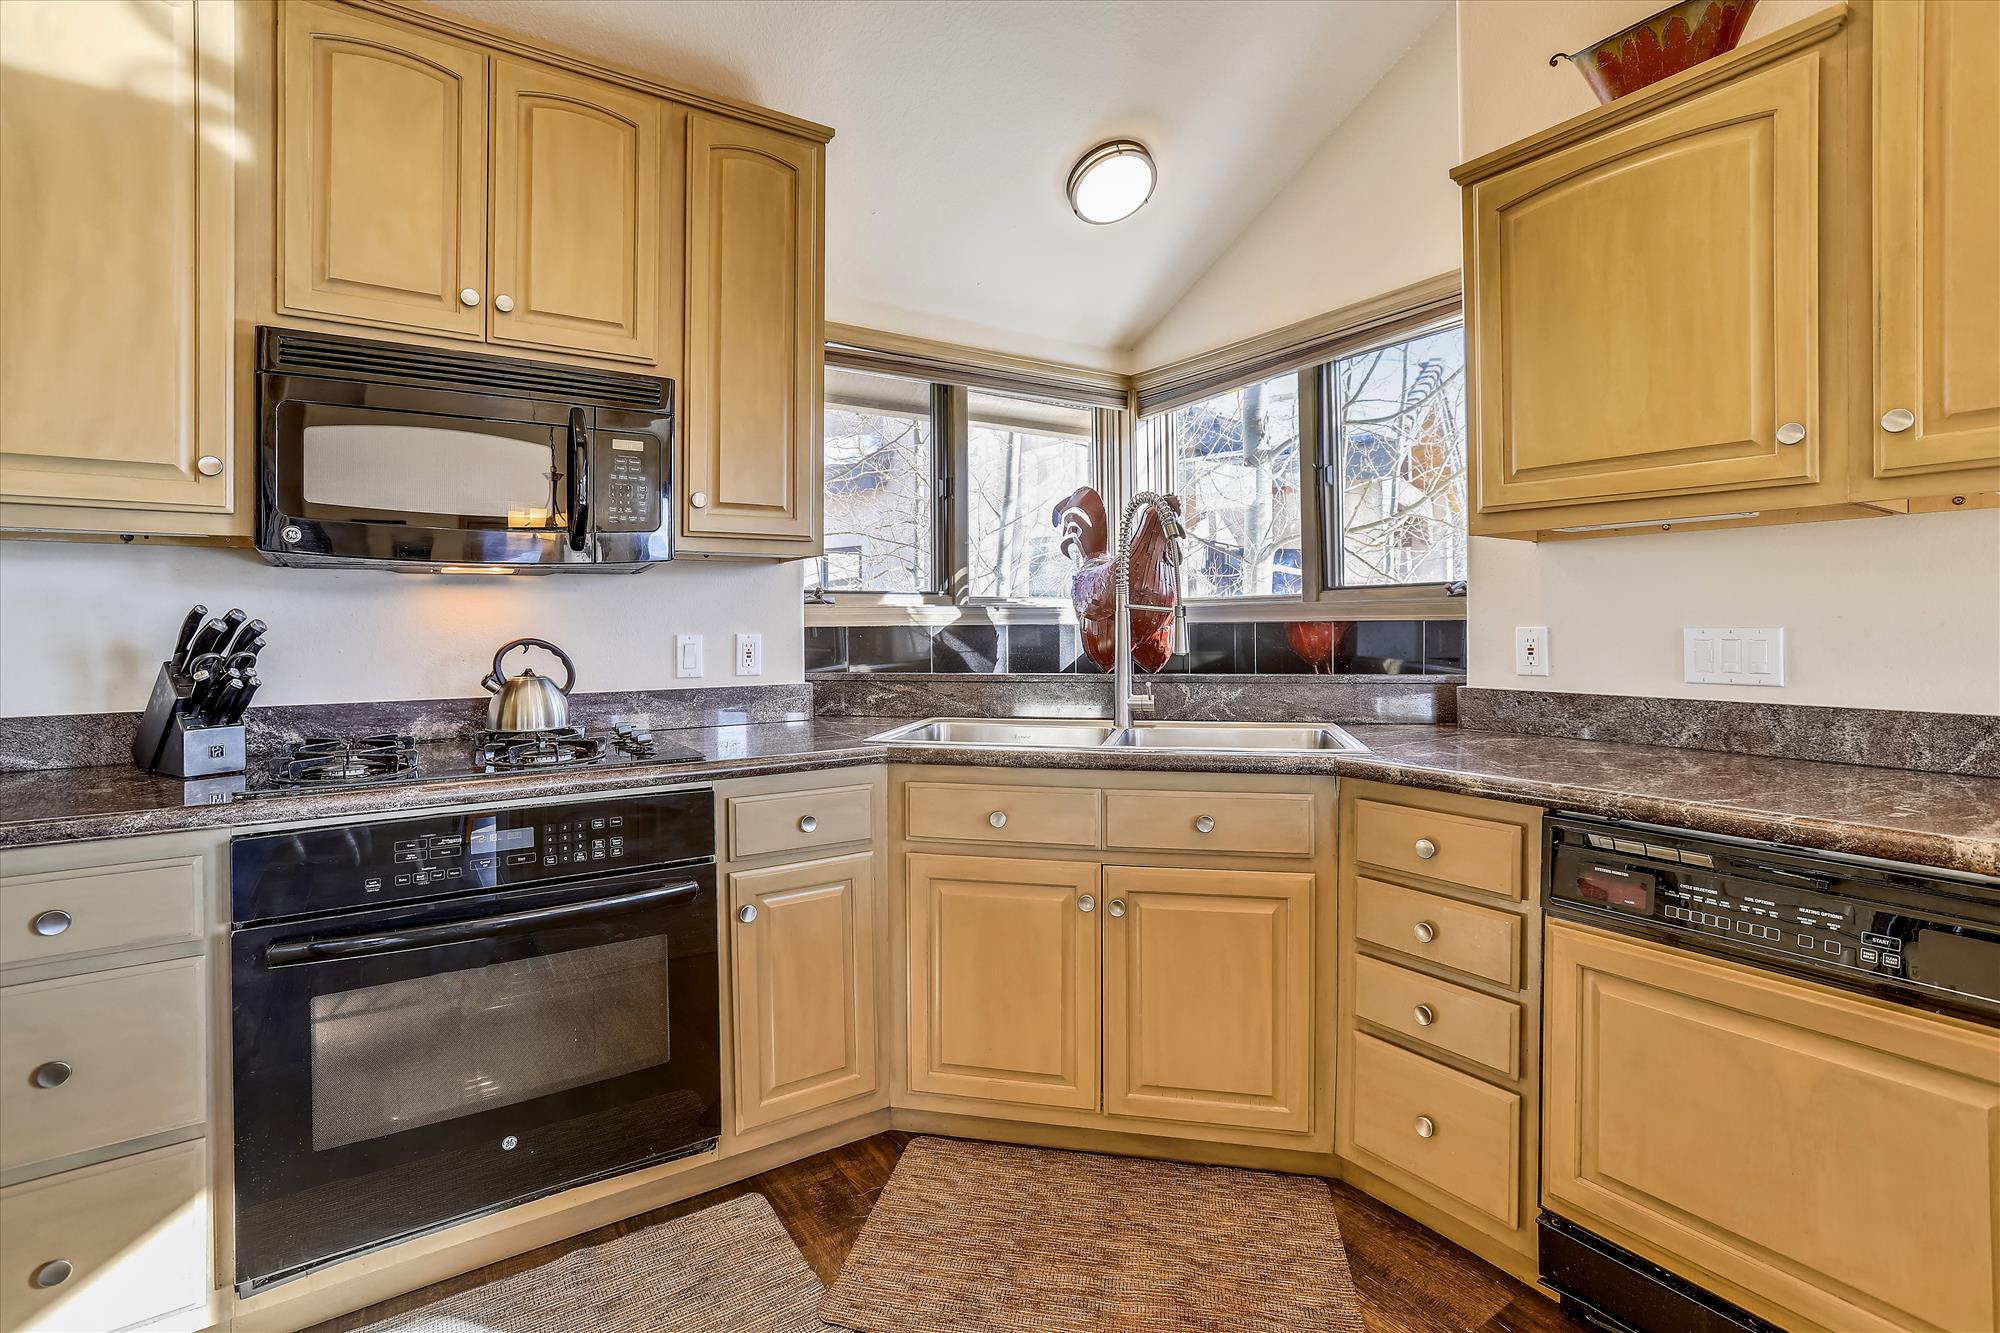 The kitchen boasts plenty of counter space.